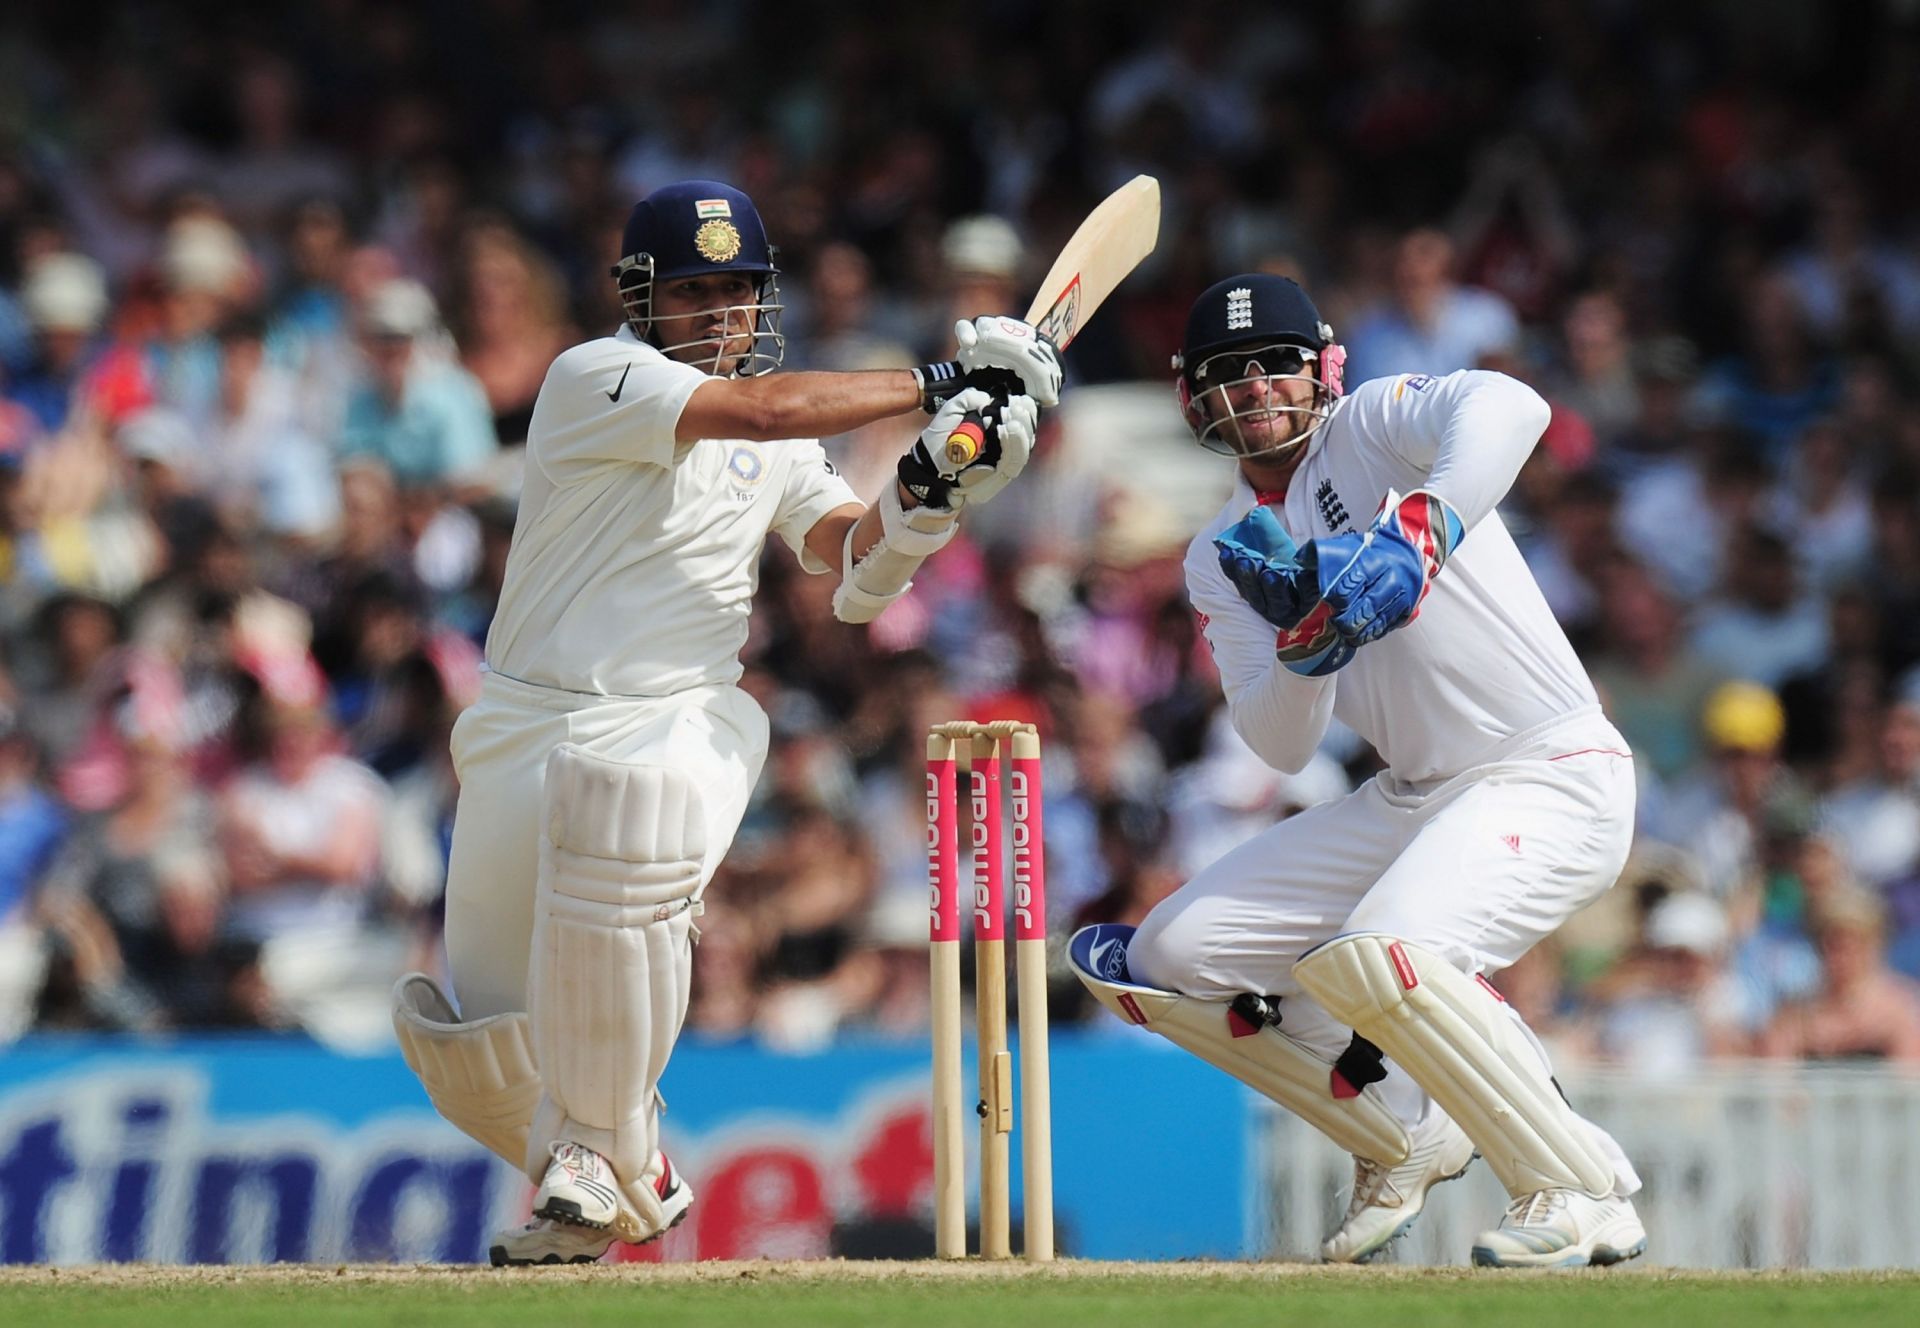 Sachin Tendulkar has scored most runs in India vs England Tests. (Pic: Getty Images)